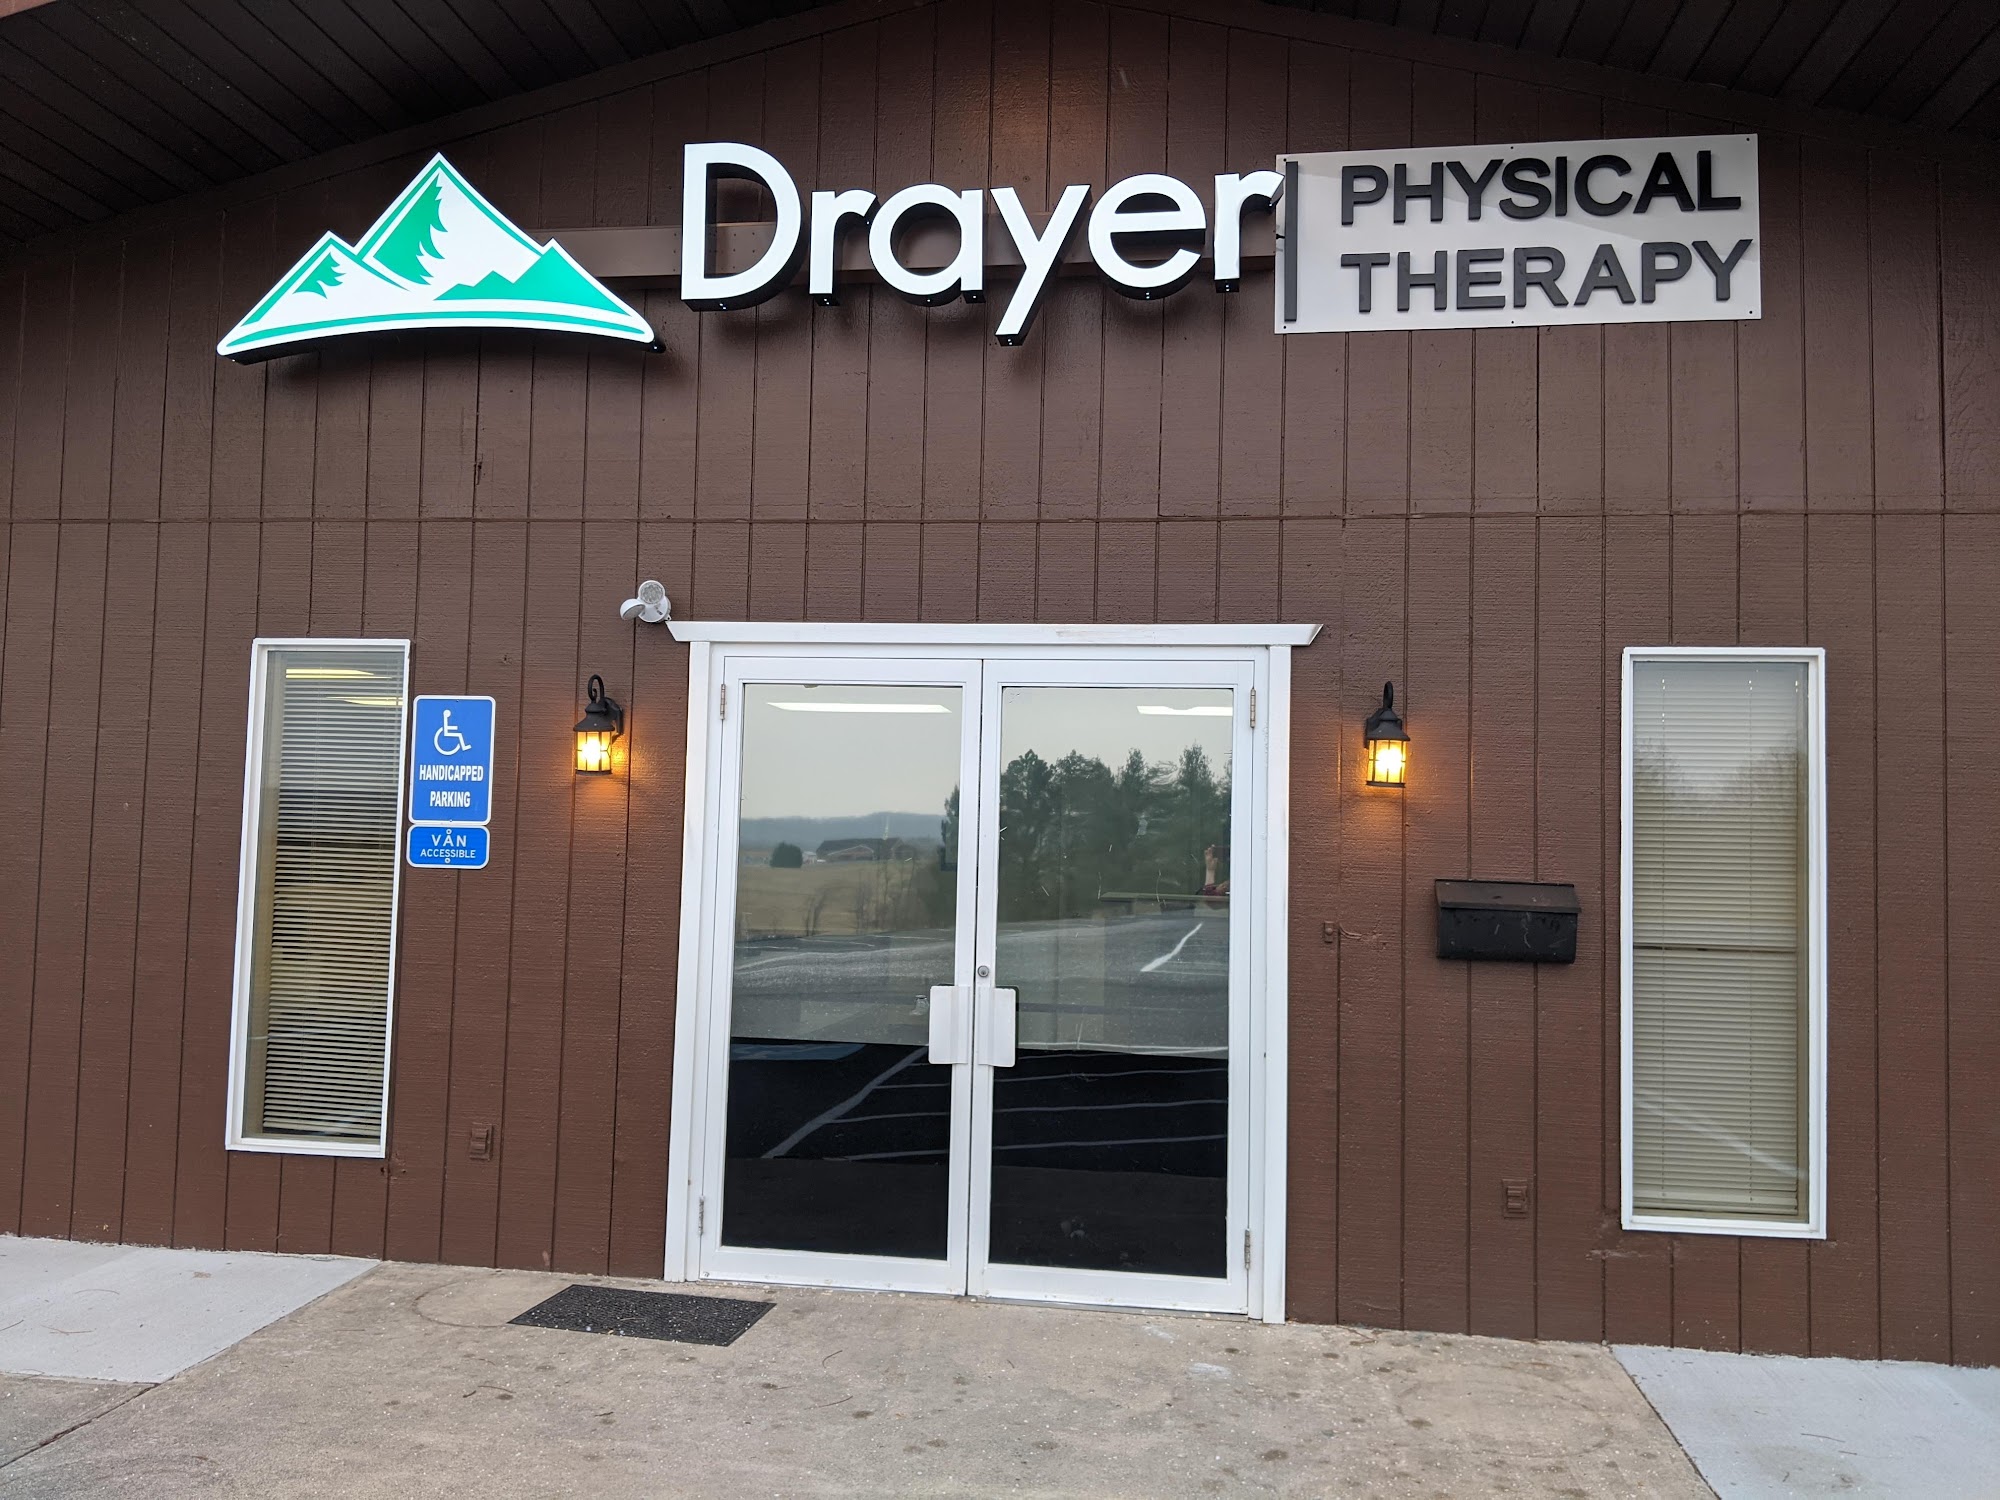 Drayer Physical Therapy Institute 55 W Shortcut Rd, Newport Pennsylvania 17074